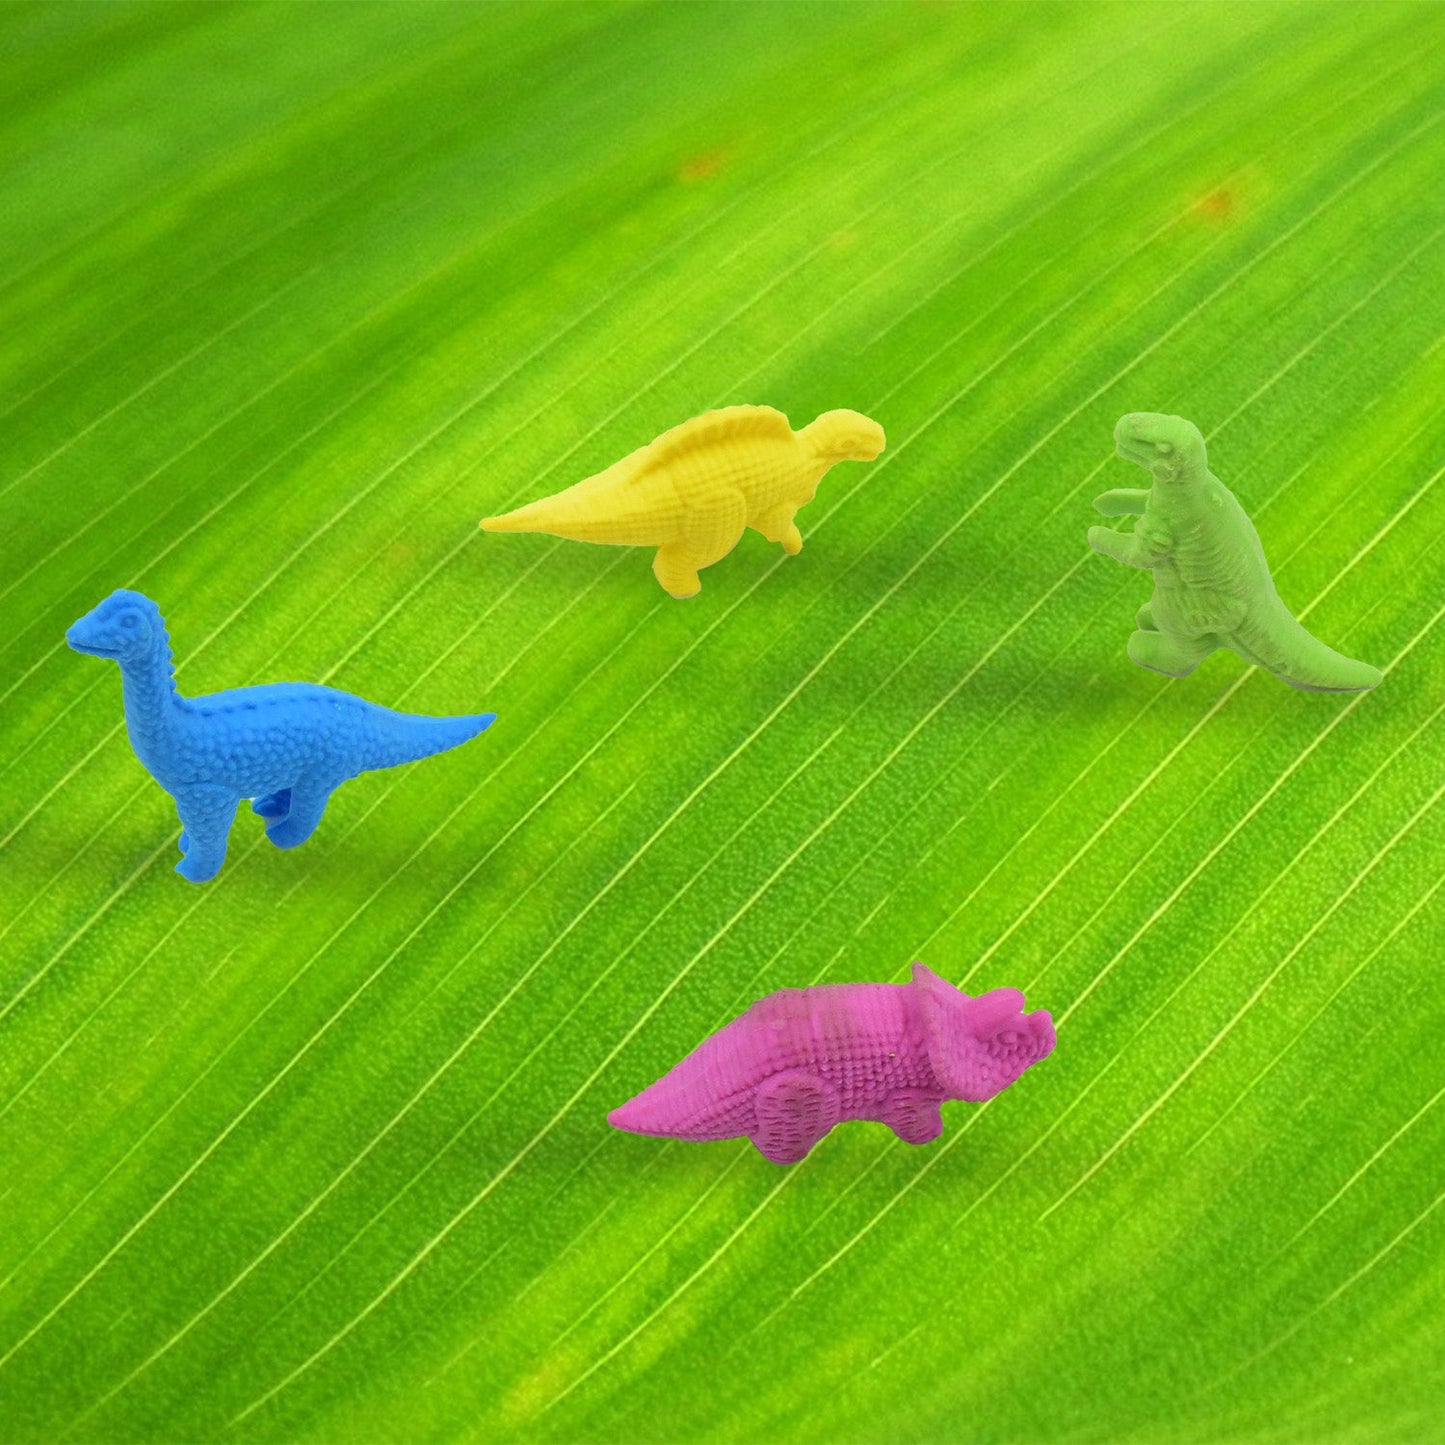 Small Dinosaur Shaped Erasers Animal Erasers for Kids, Dinosaur Erasers Puzzle 3D Eraser, Soft Non-Dust Stationery Activity Toy, for School Supplies (4 Pc Set)